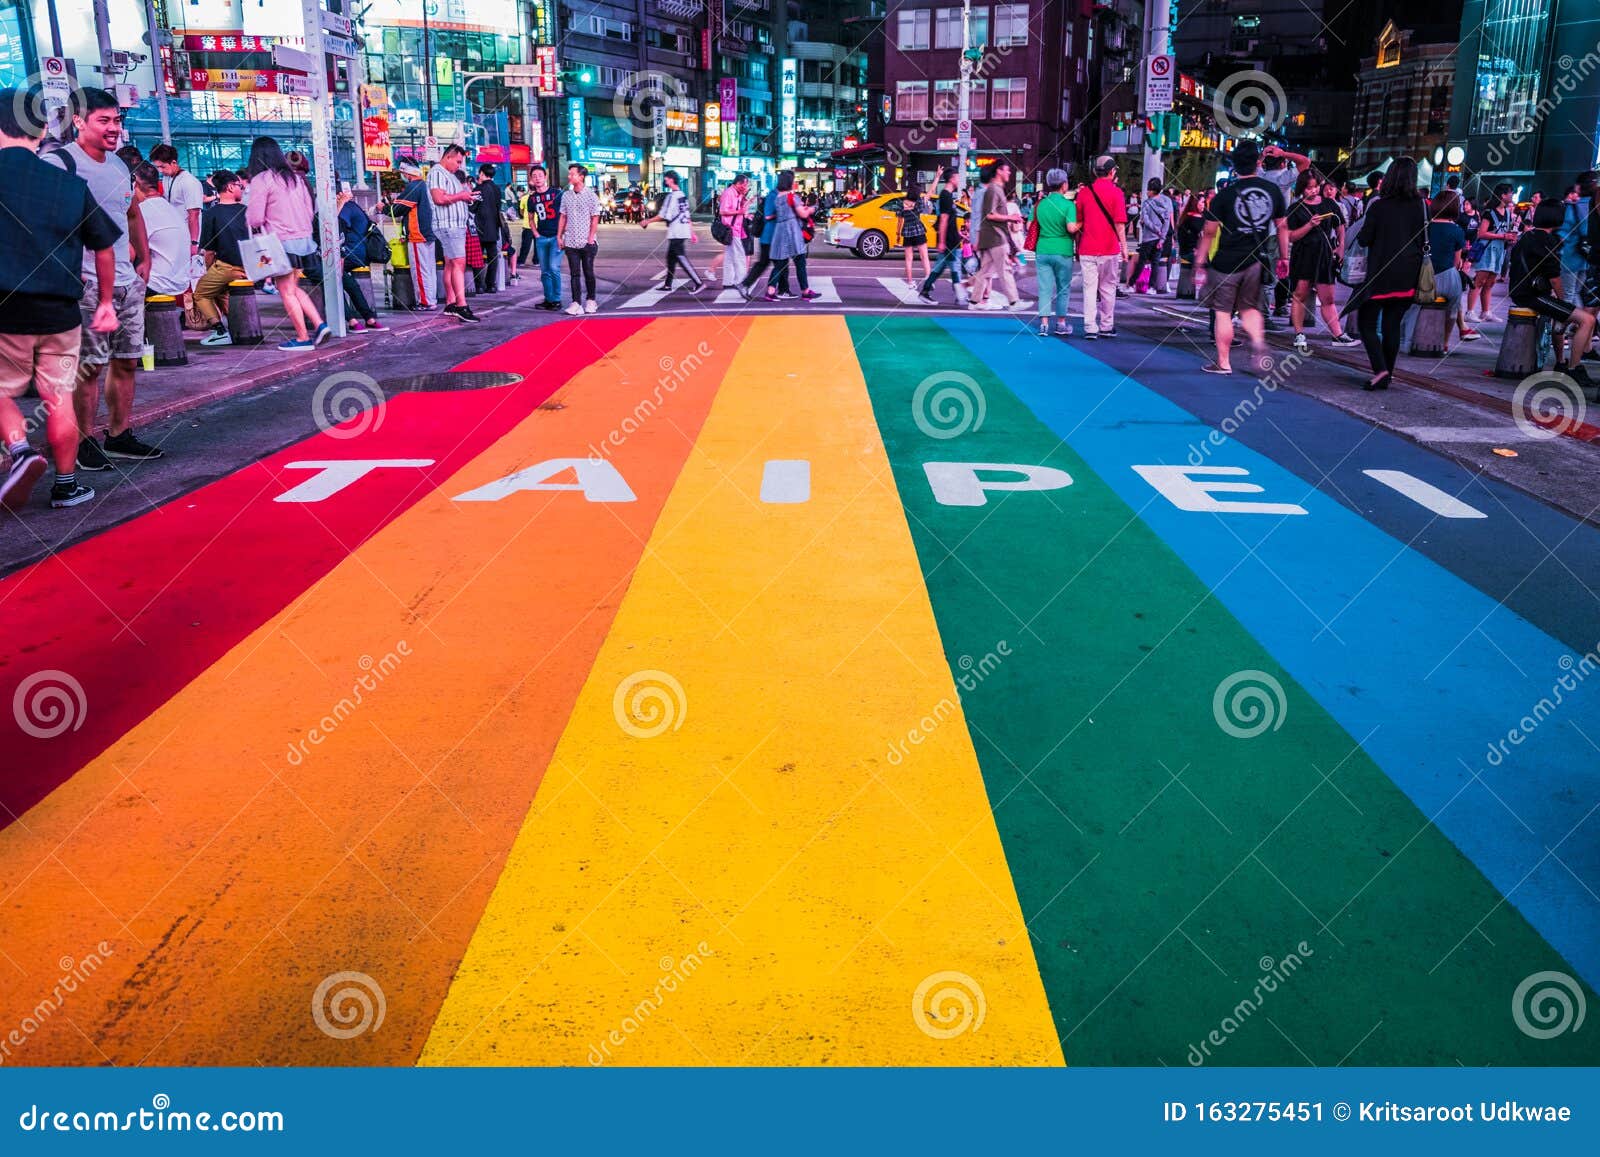 Crowded People At Colorful Rainbow Road In Ximending District Taipei Taiwan Editorial Photo Image Of Light Busy